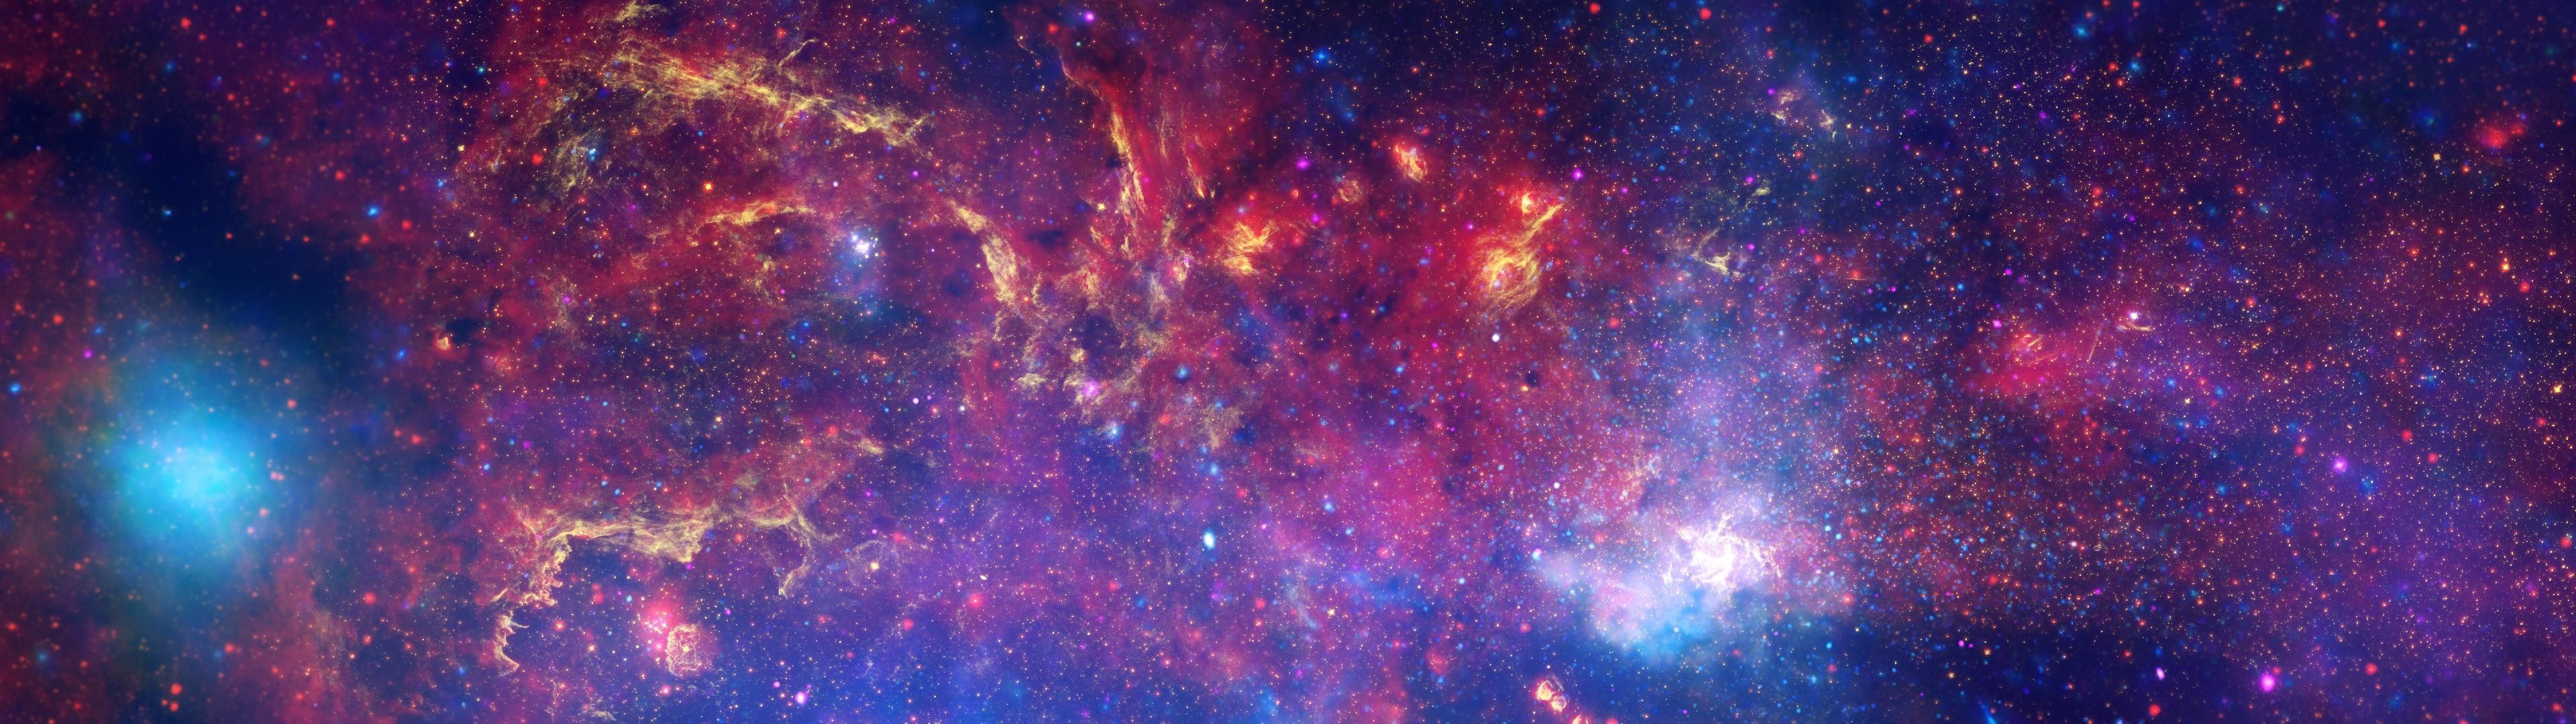 3840x1080 Space Telescope Mix Dual Wallpapers